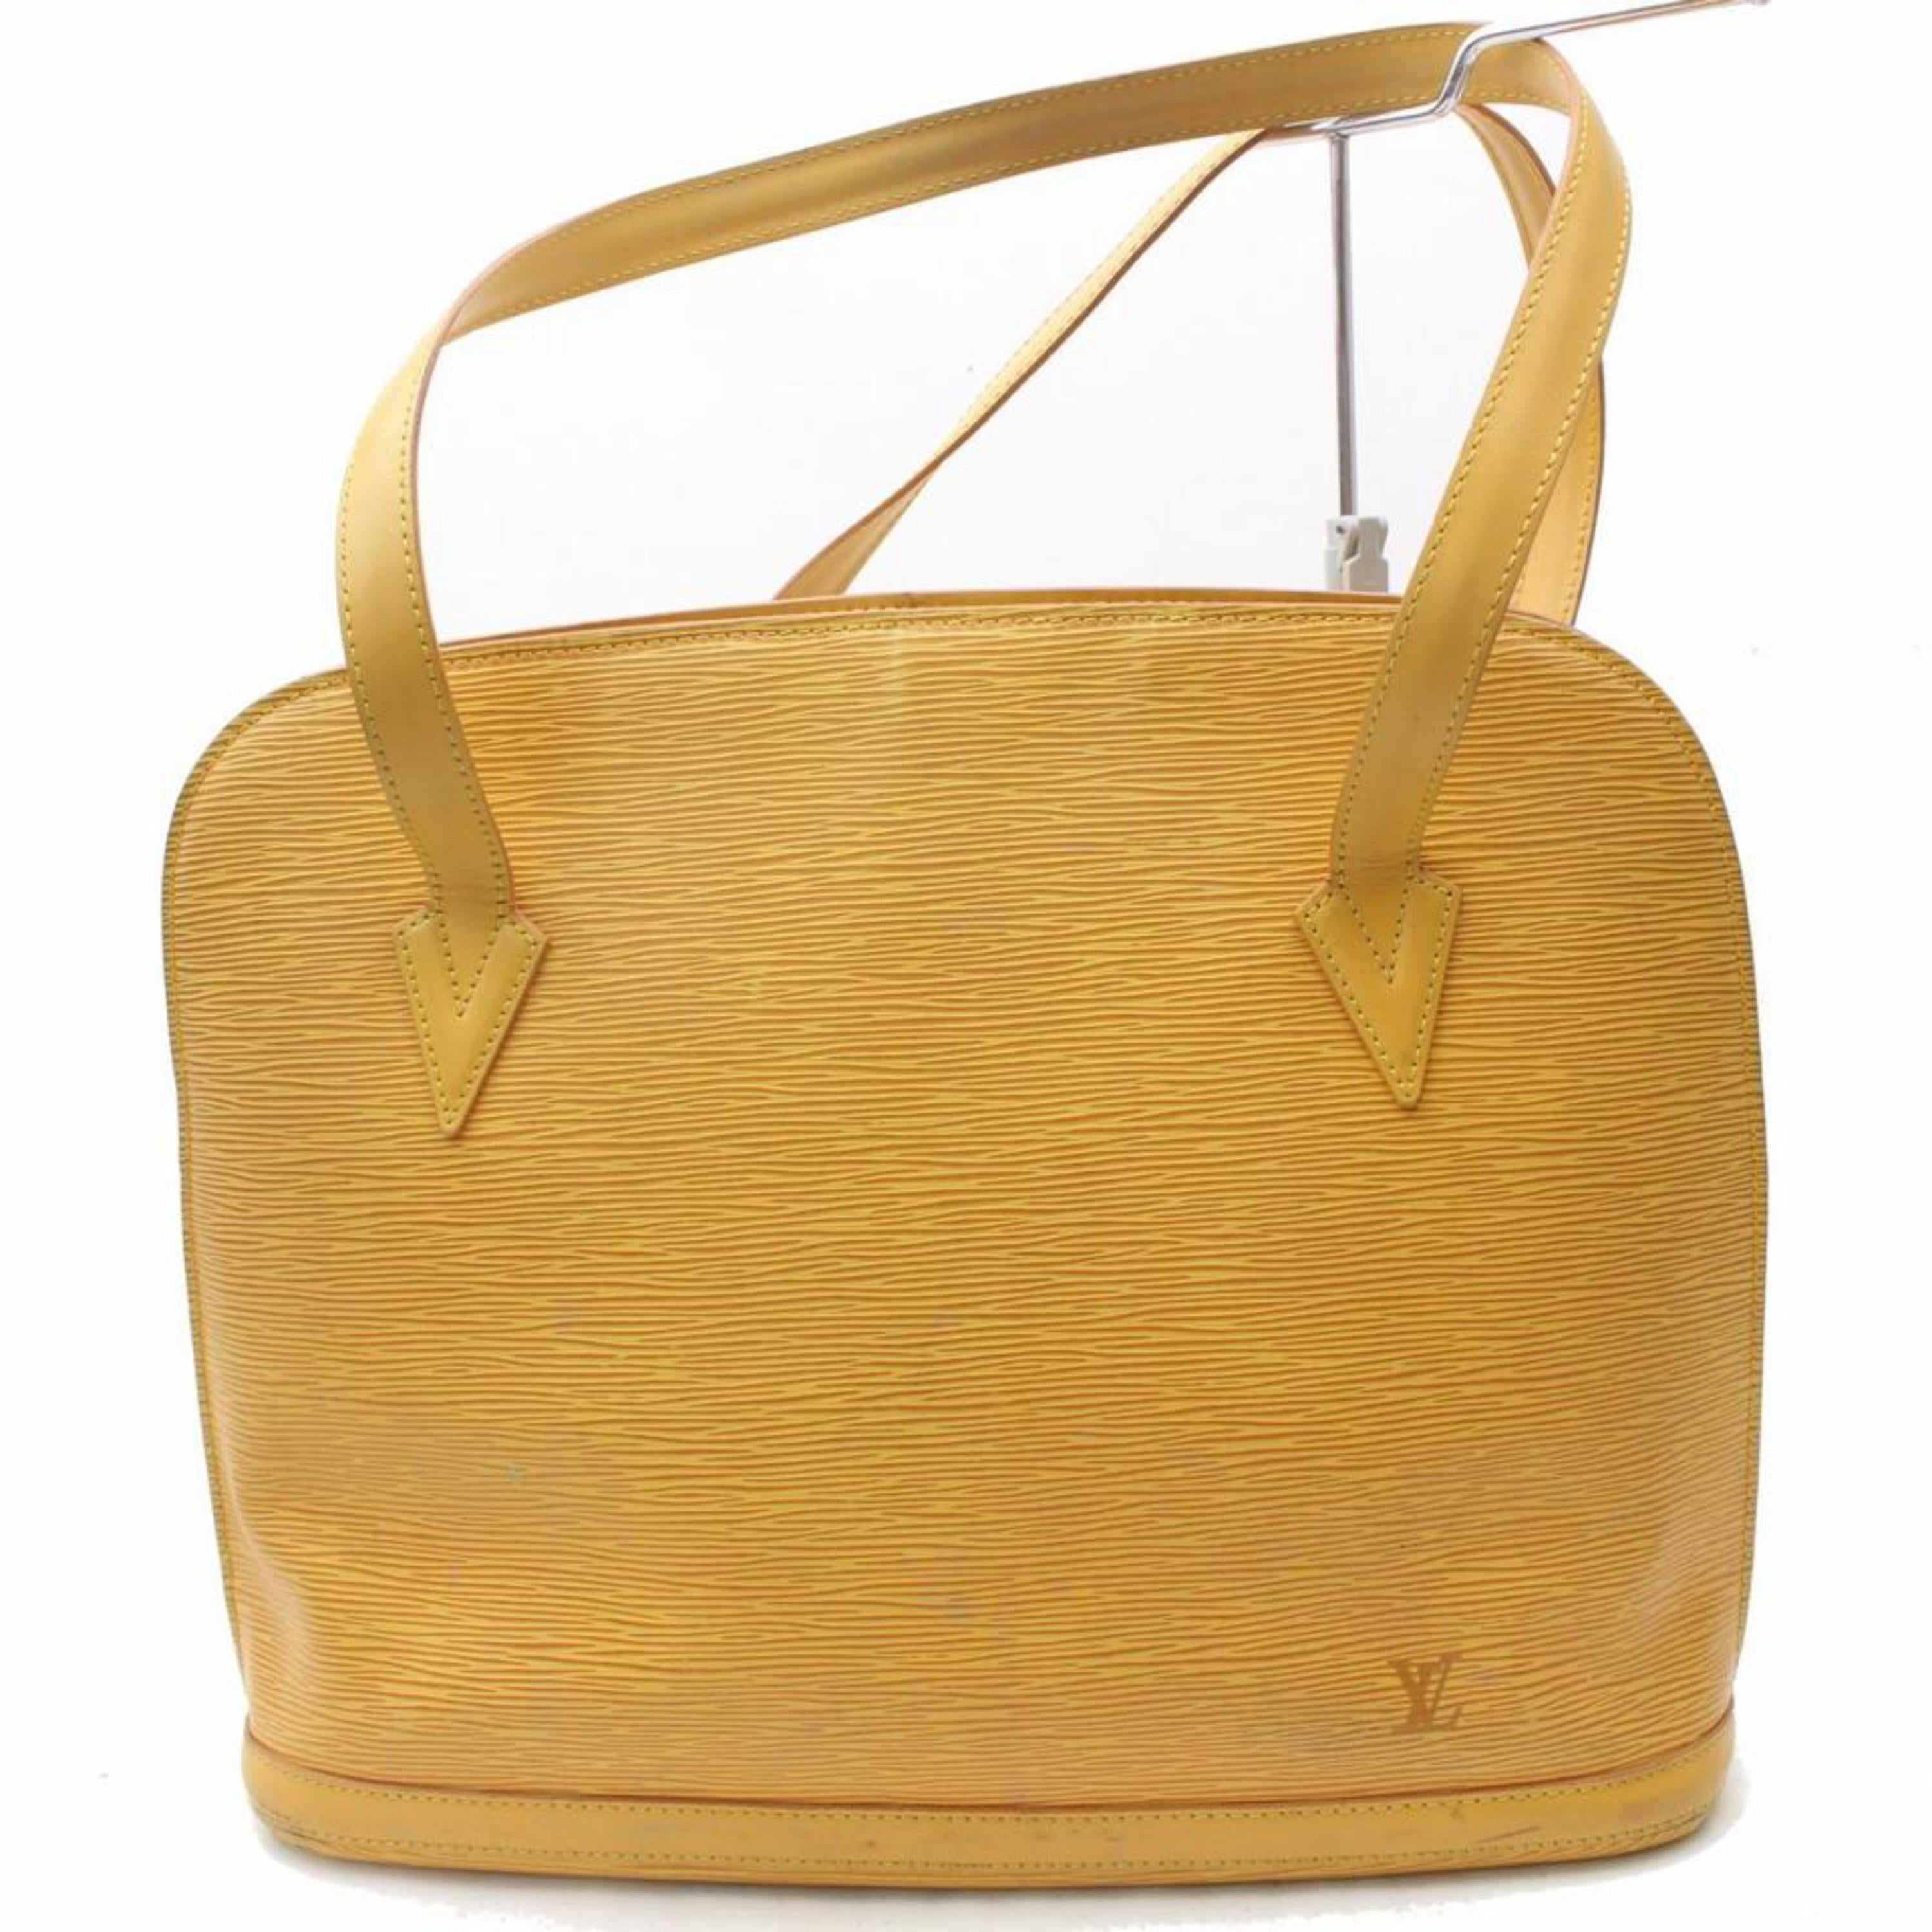 Louis Vuitton Lussac Tassil Zip Tote 869647 Yellow Leather Shoulder Bag For Sale 5